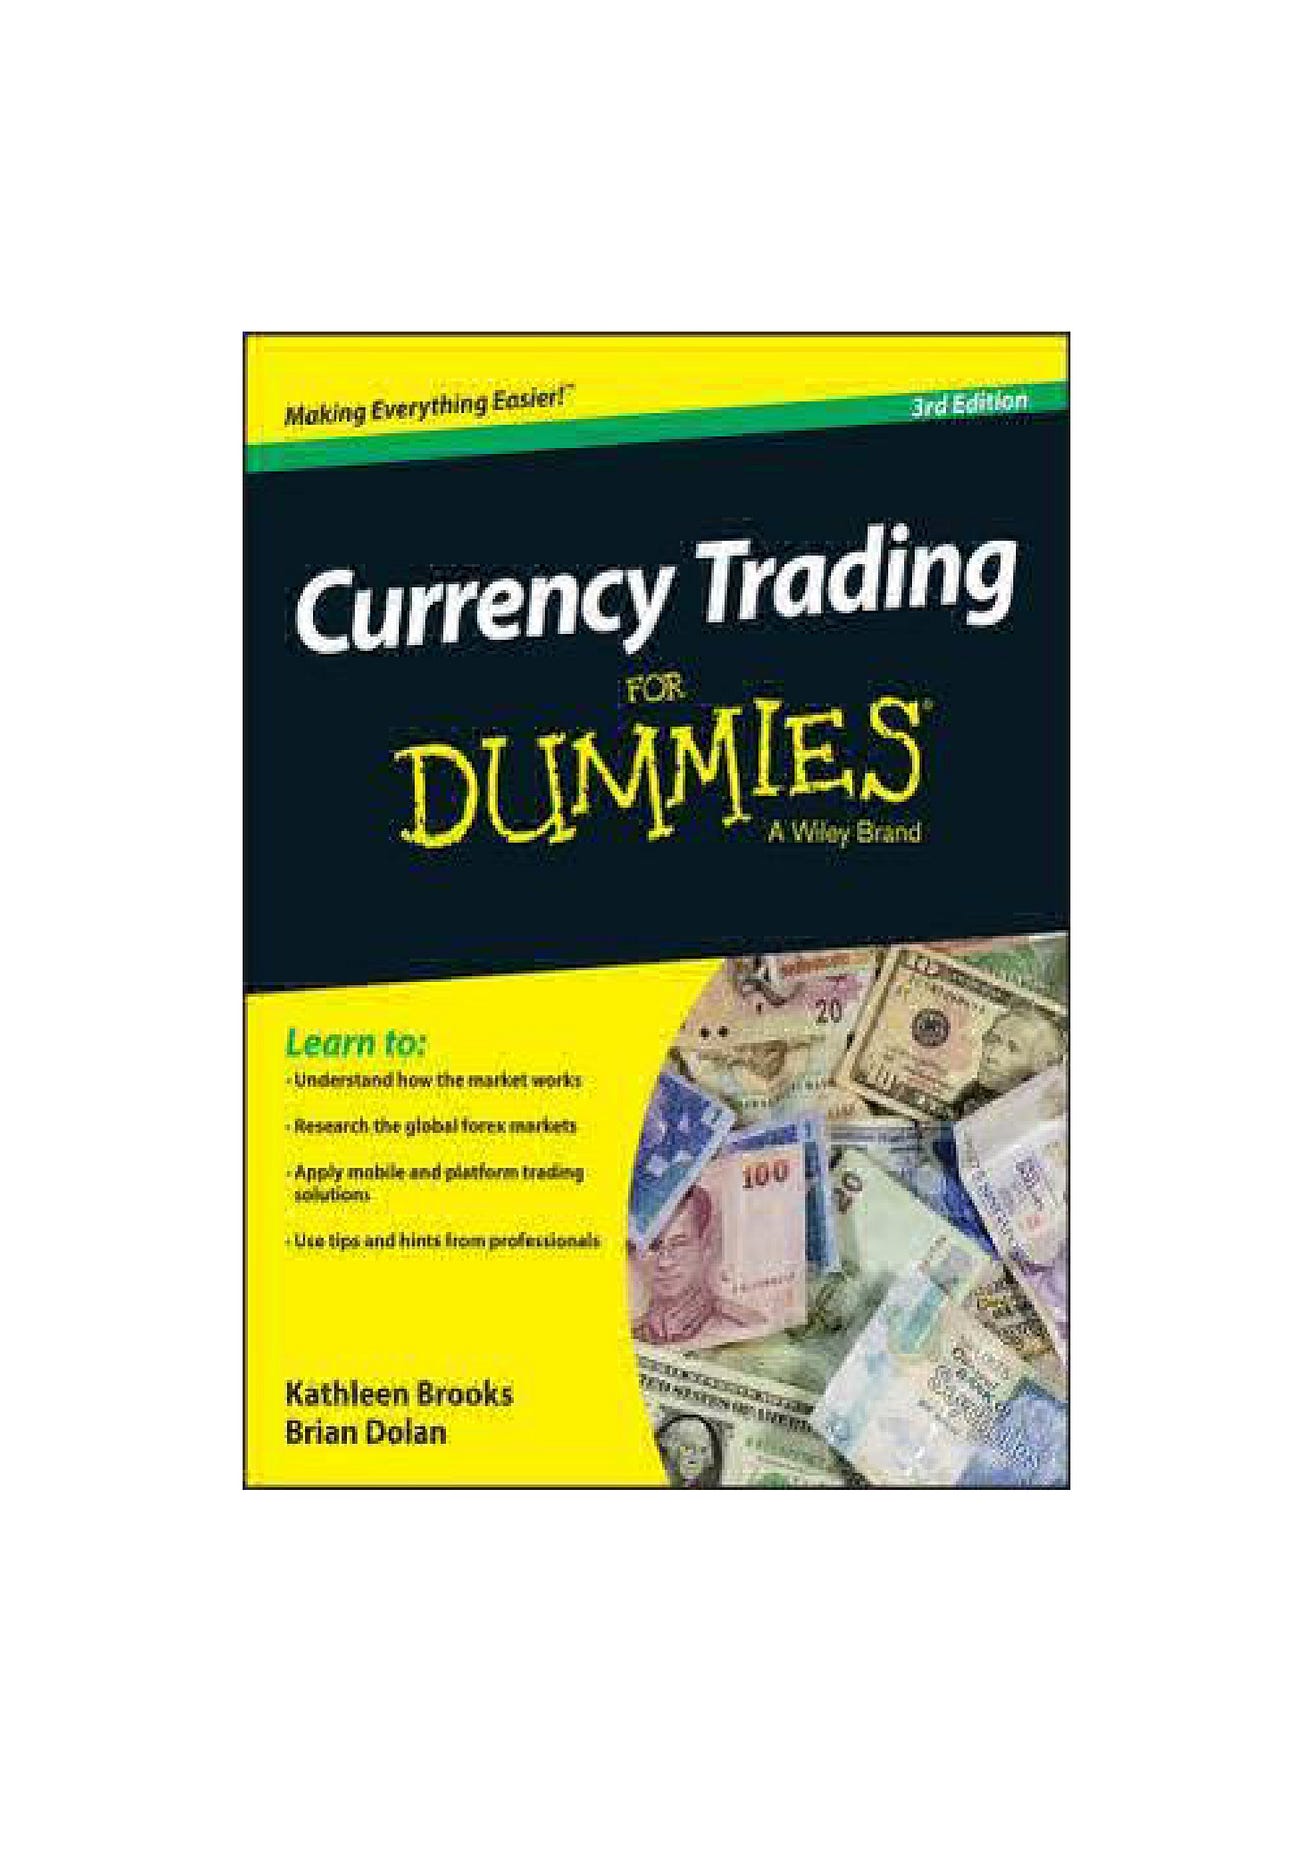 Currency Trading For Dummies Pdf Download - Forex Fury ...